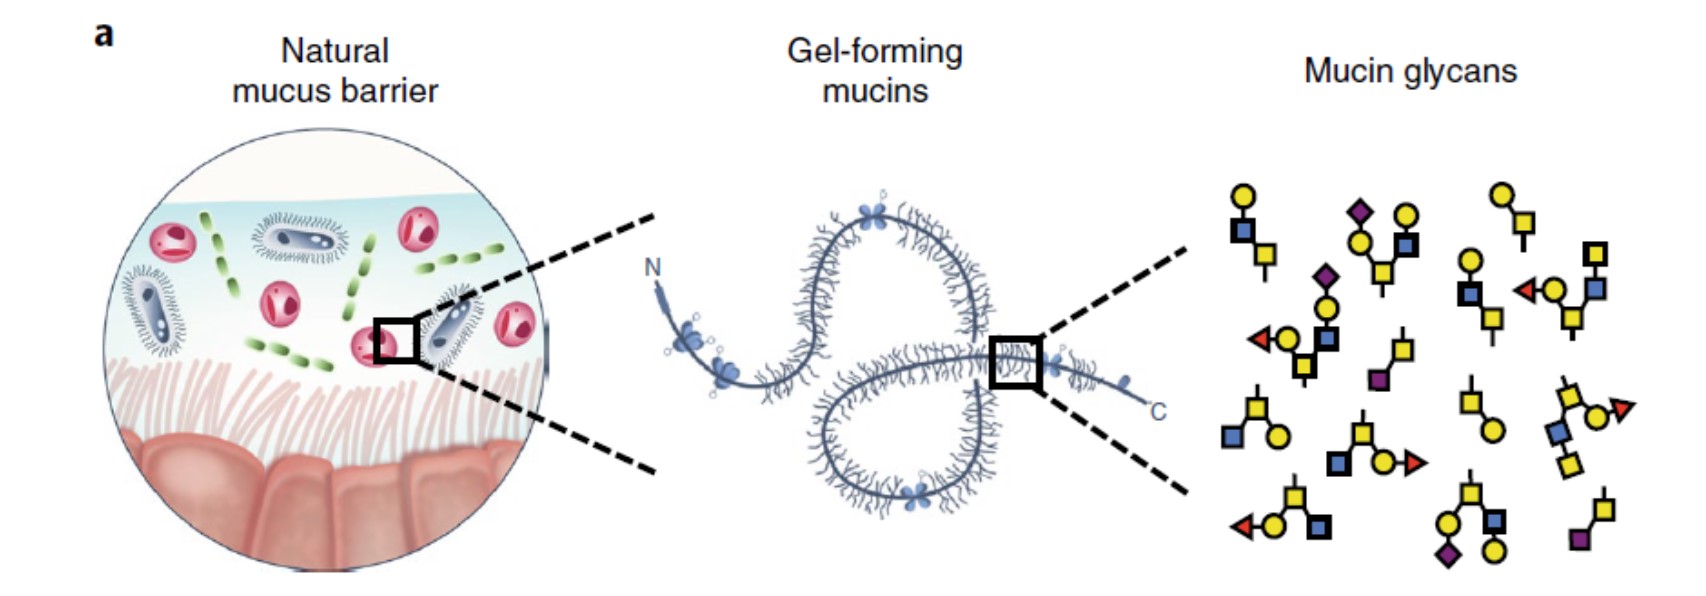 mucin glycans in natural mucus barieer